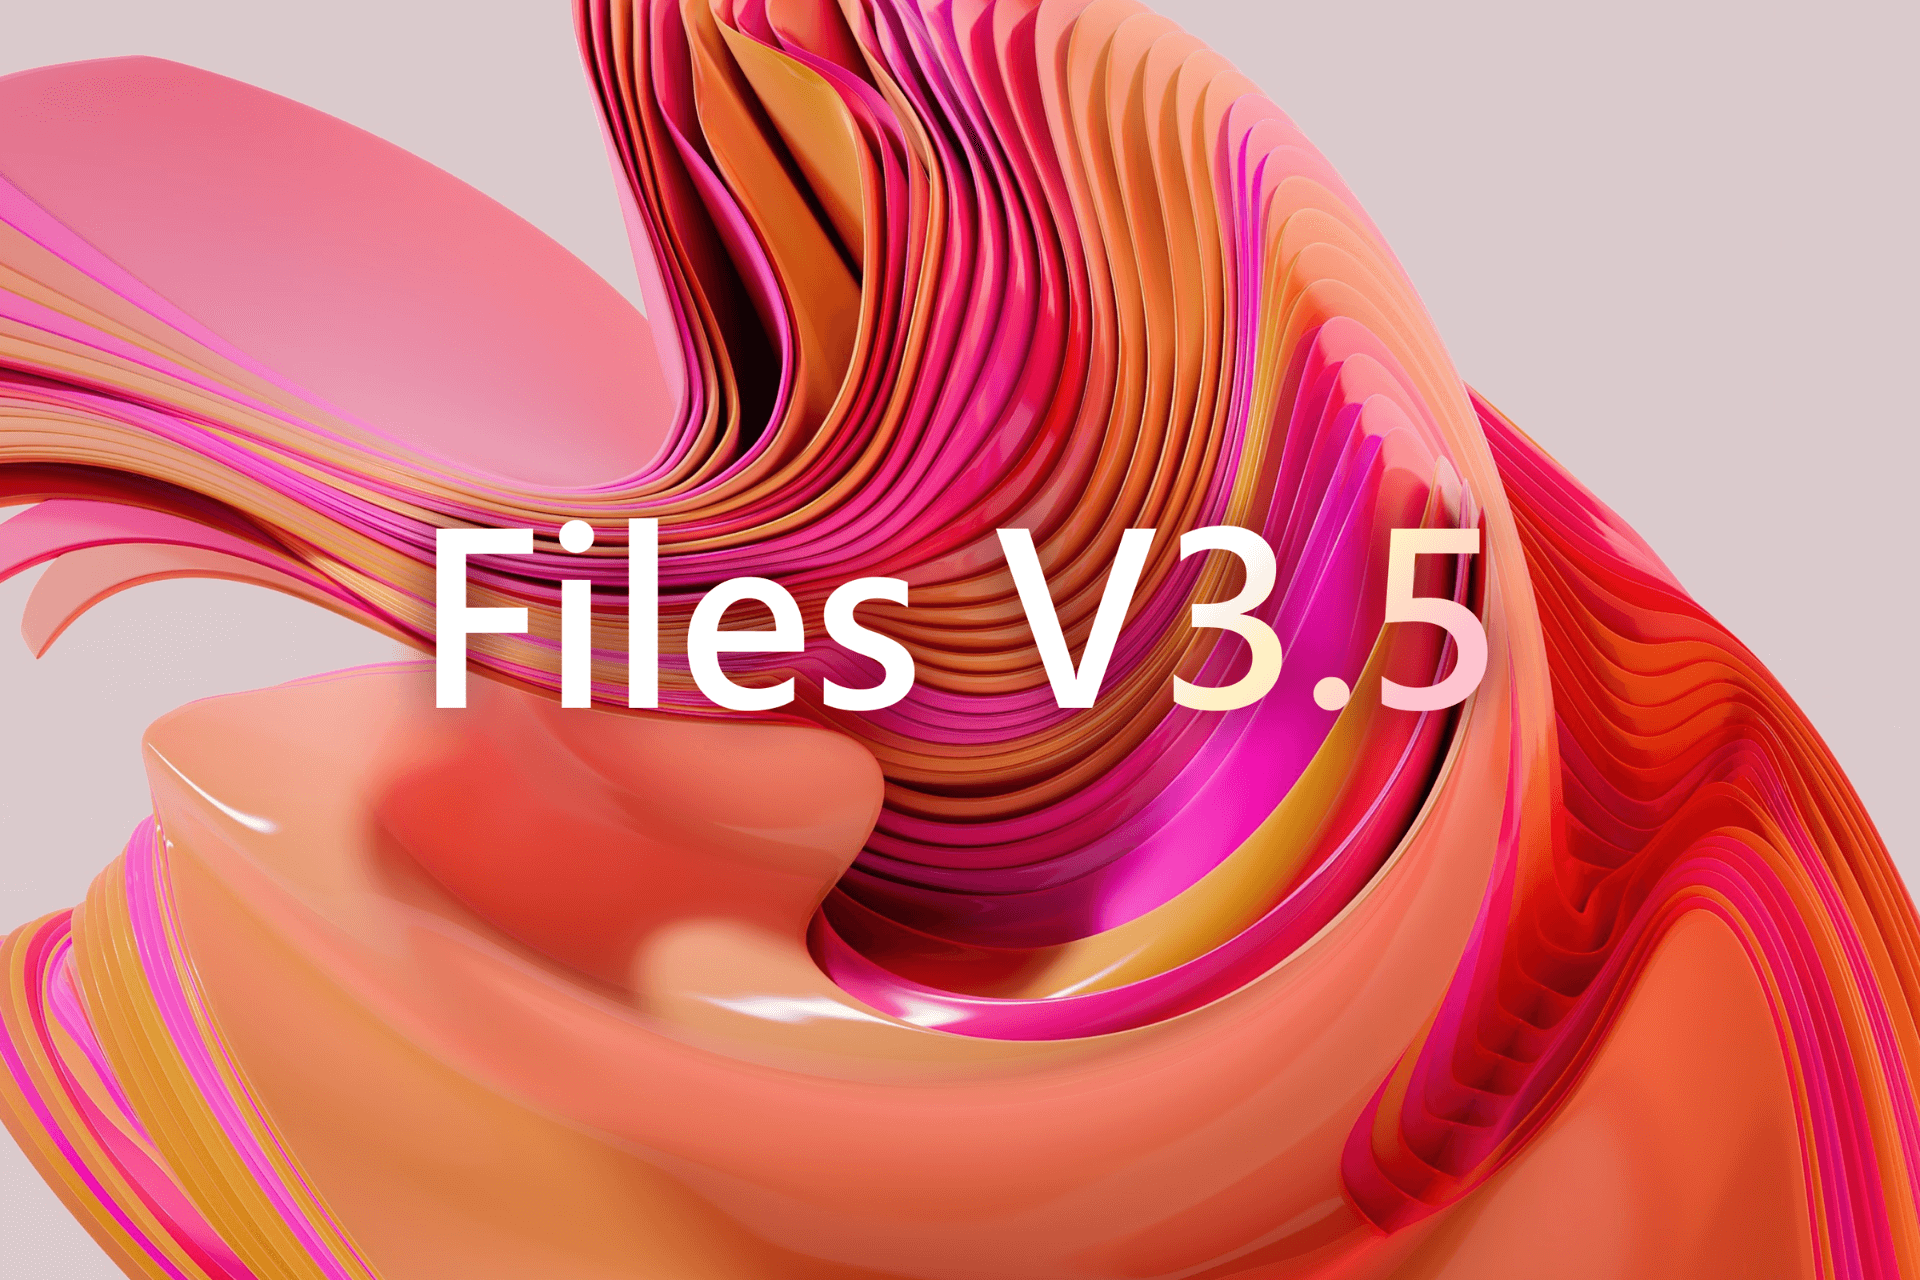 Files v3.5 is out and has a refreshed design and other improvements